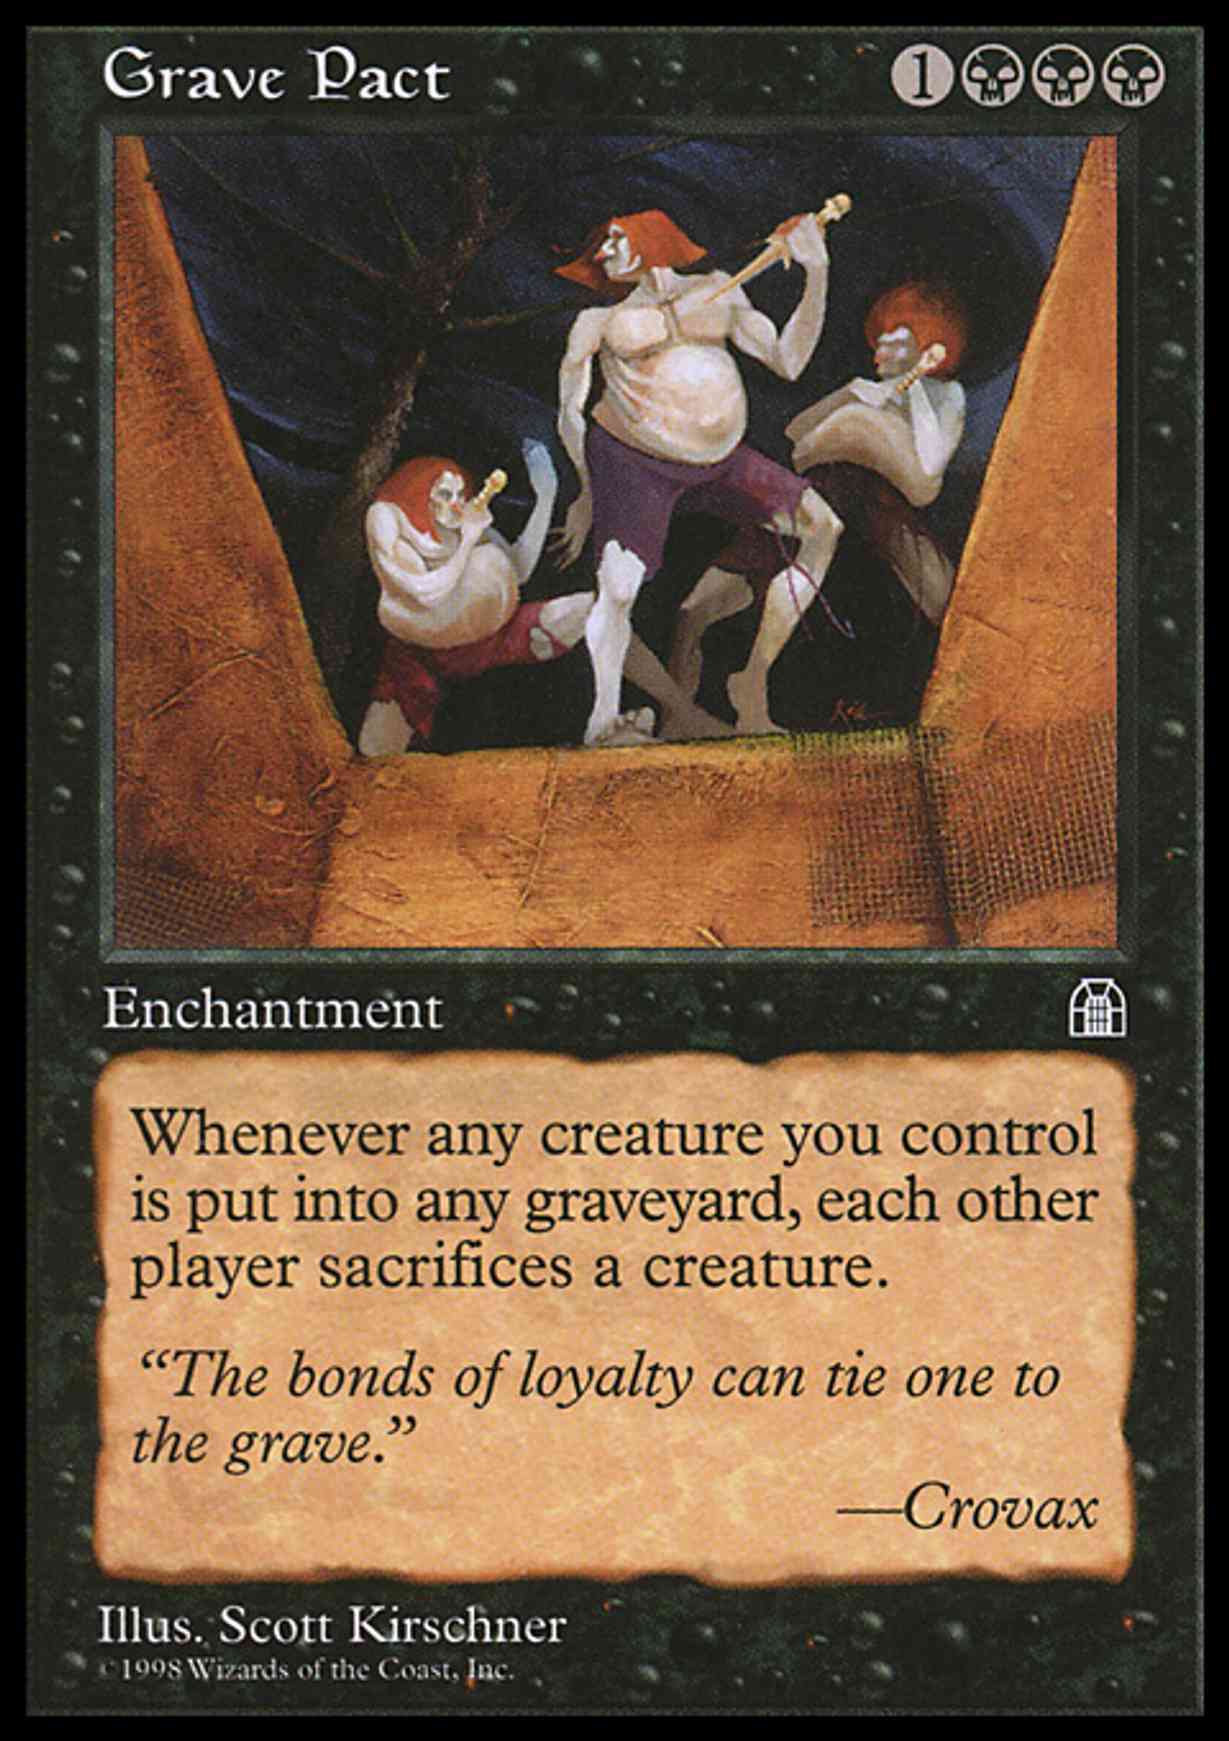 Grave Pact magic card front